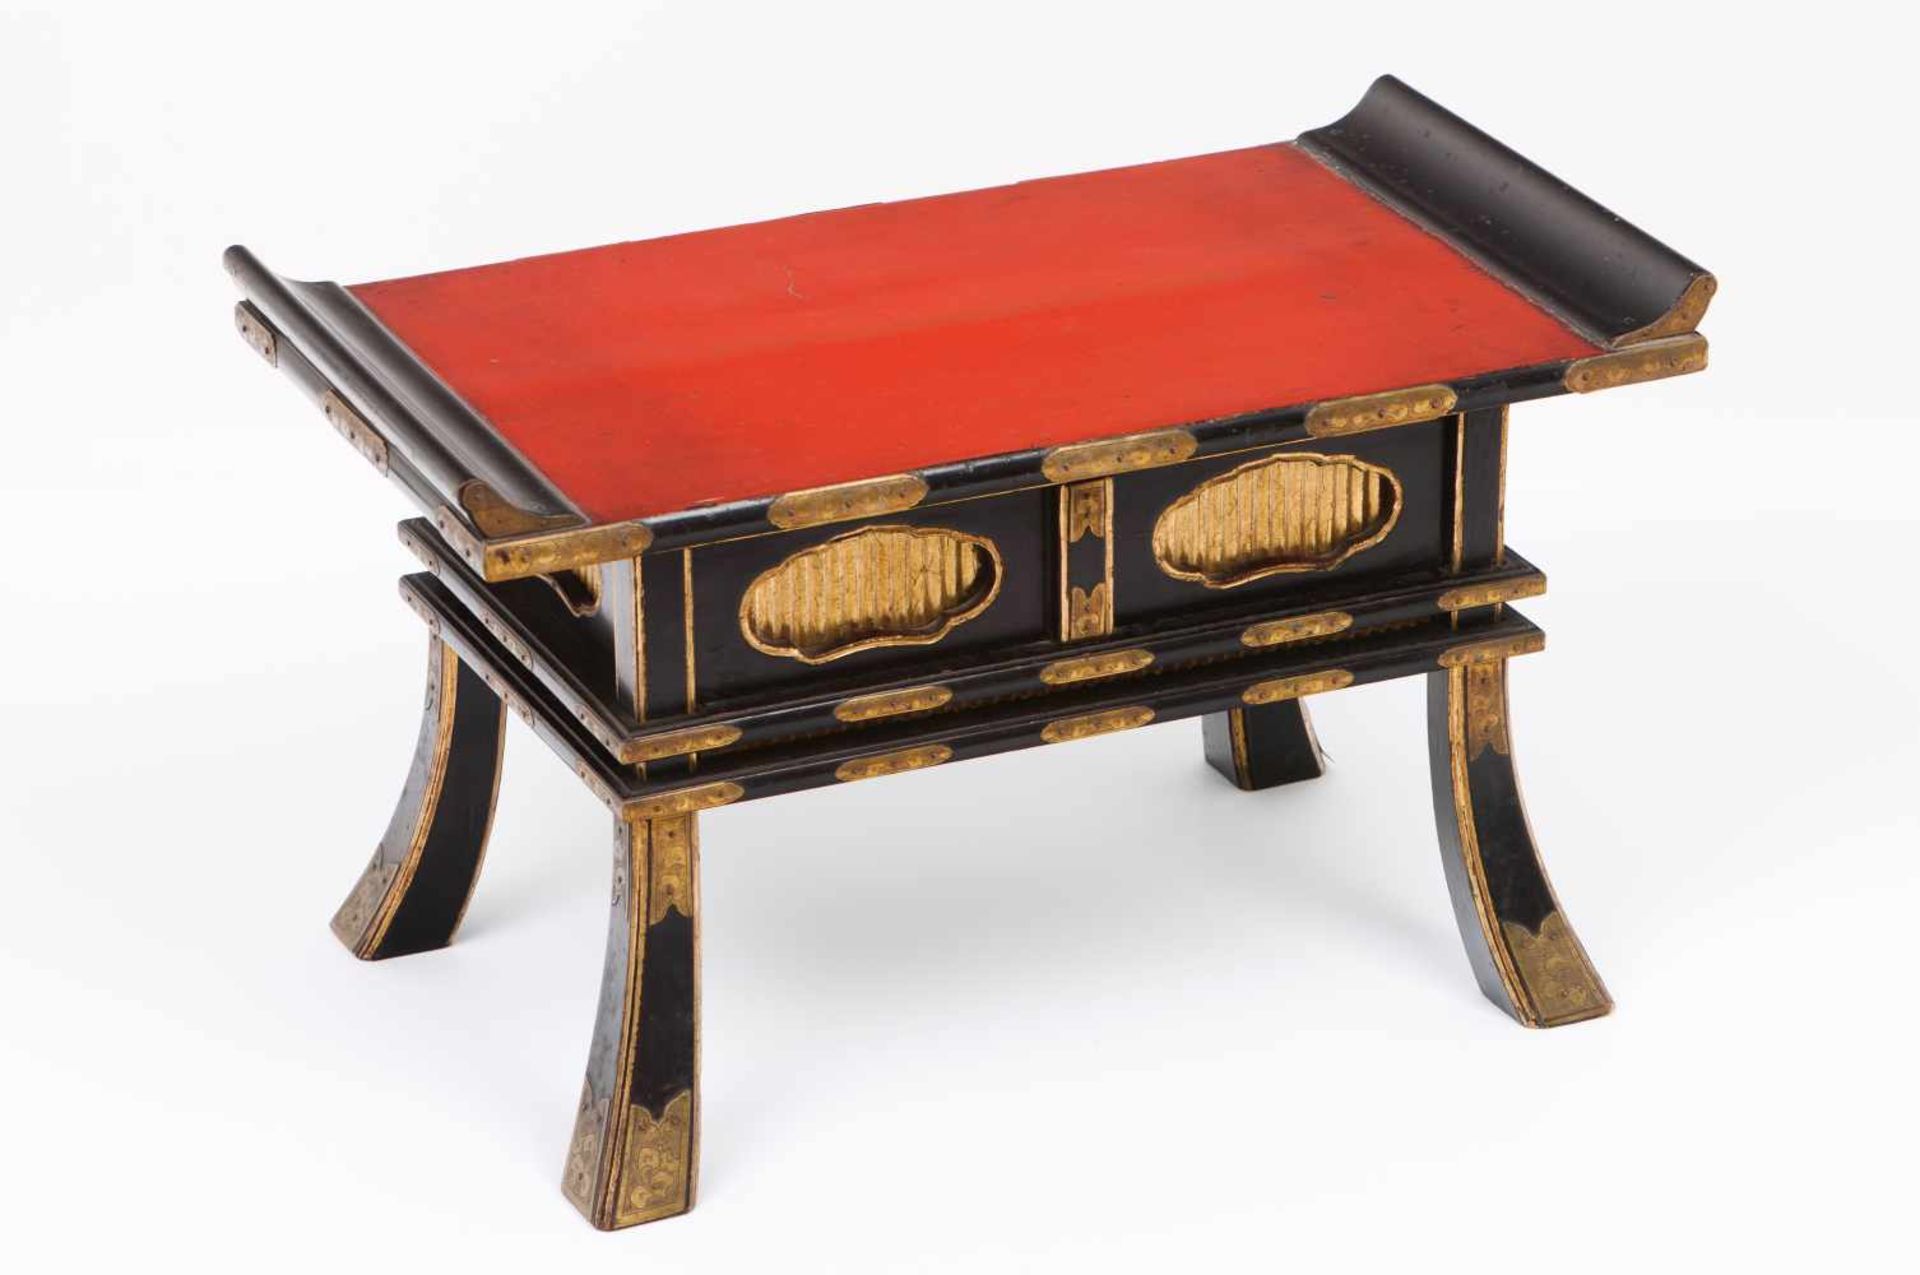 A miniature tableBlack and red lacquered woodGilt decoration with metal applied detailsOne